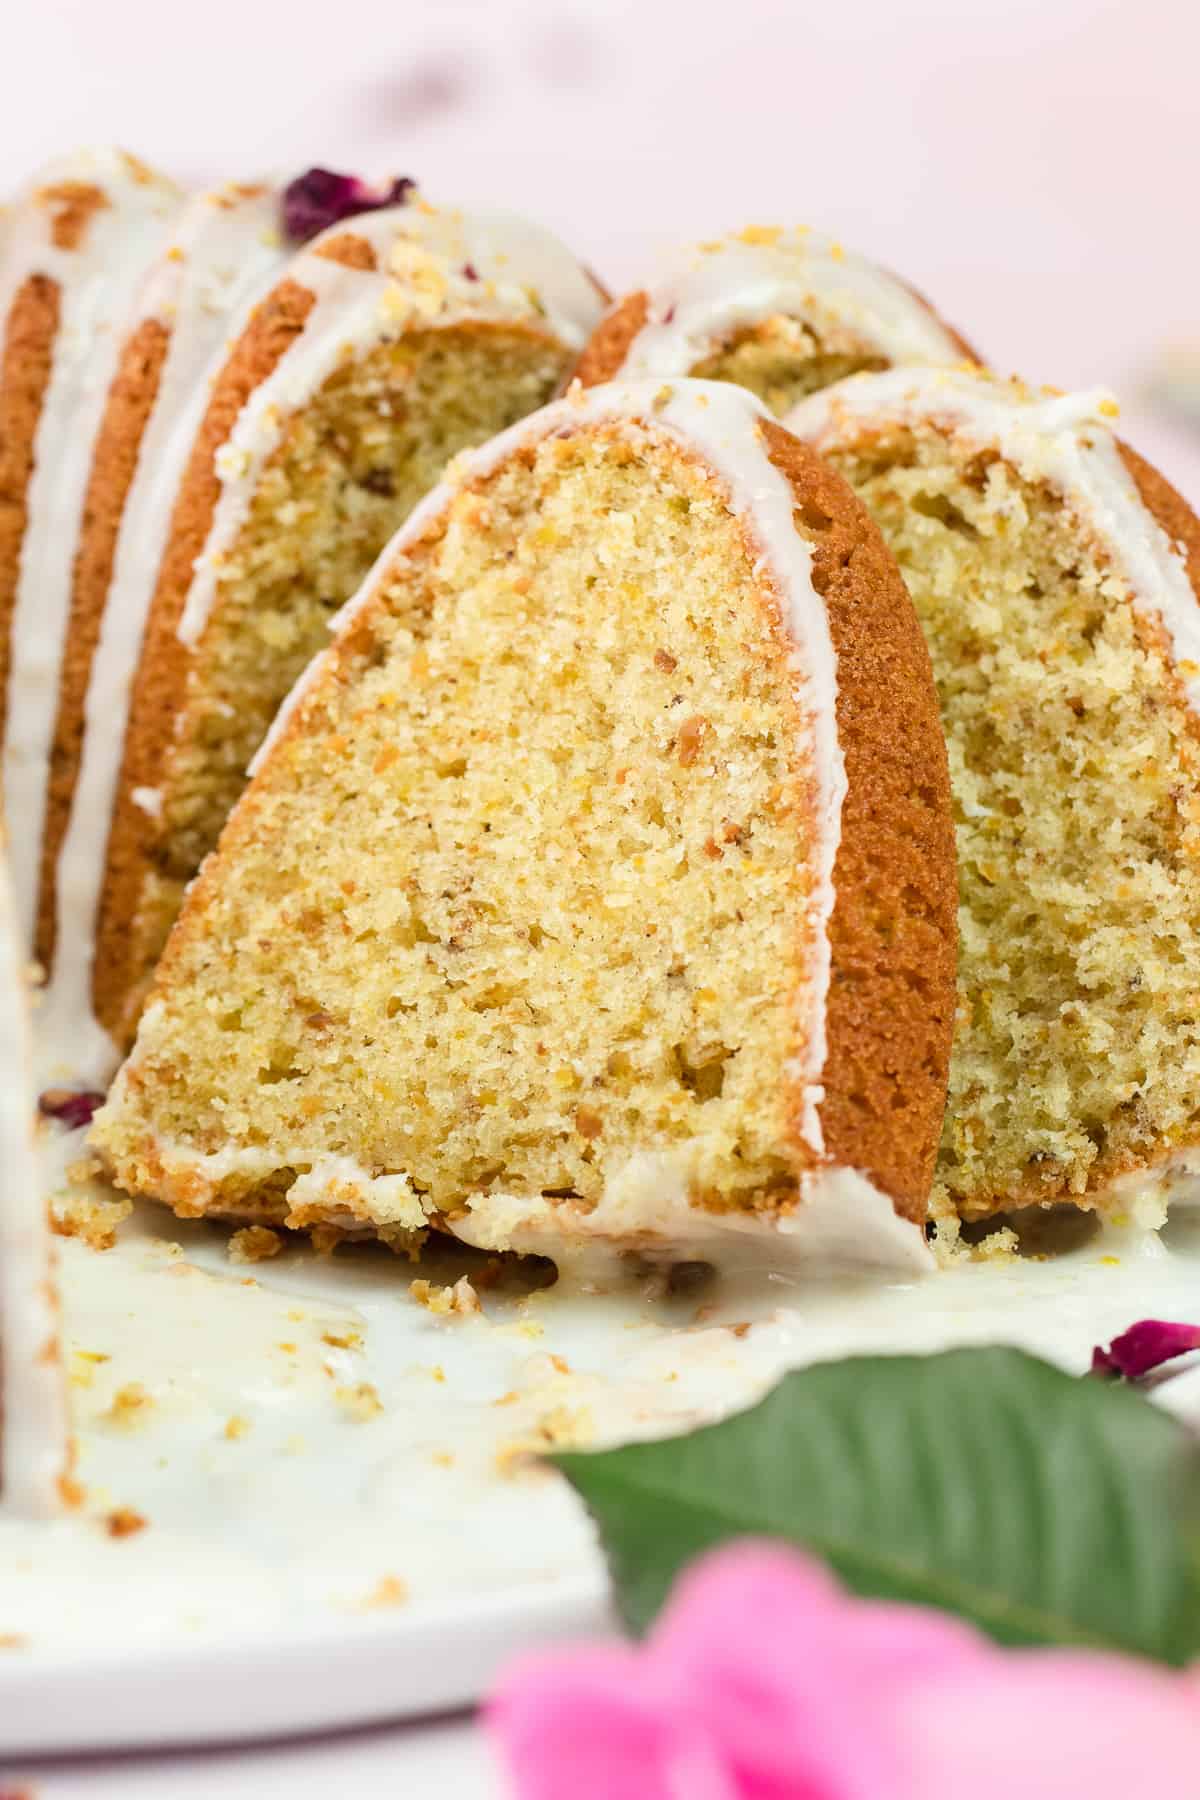 A close up of slices of Pistachio Olive Oil Cake